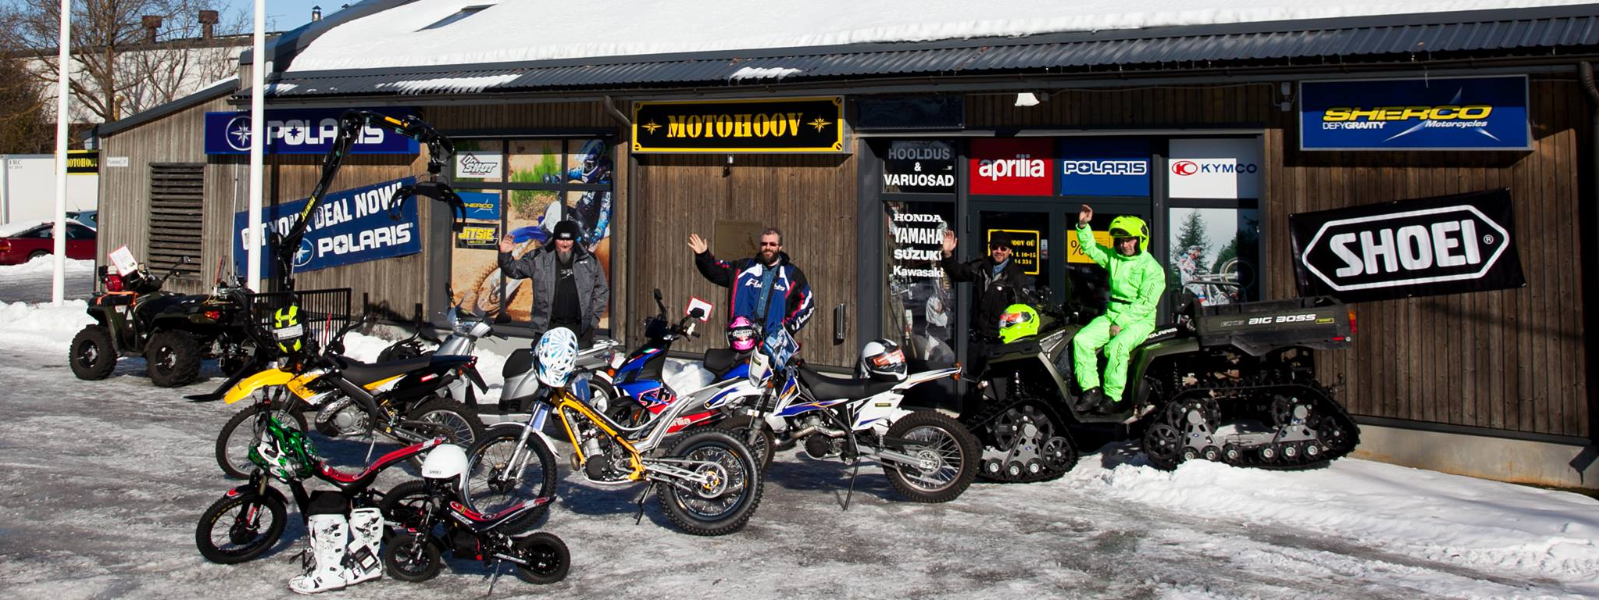 MOTOHOOV OÜ - motorcycles, atv, snowmobiles, atv-d, sports and leisure goods, means of transport, All-terrain vehicles